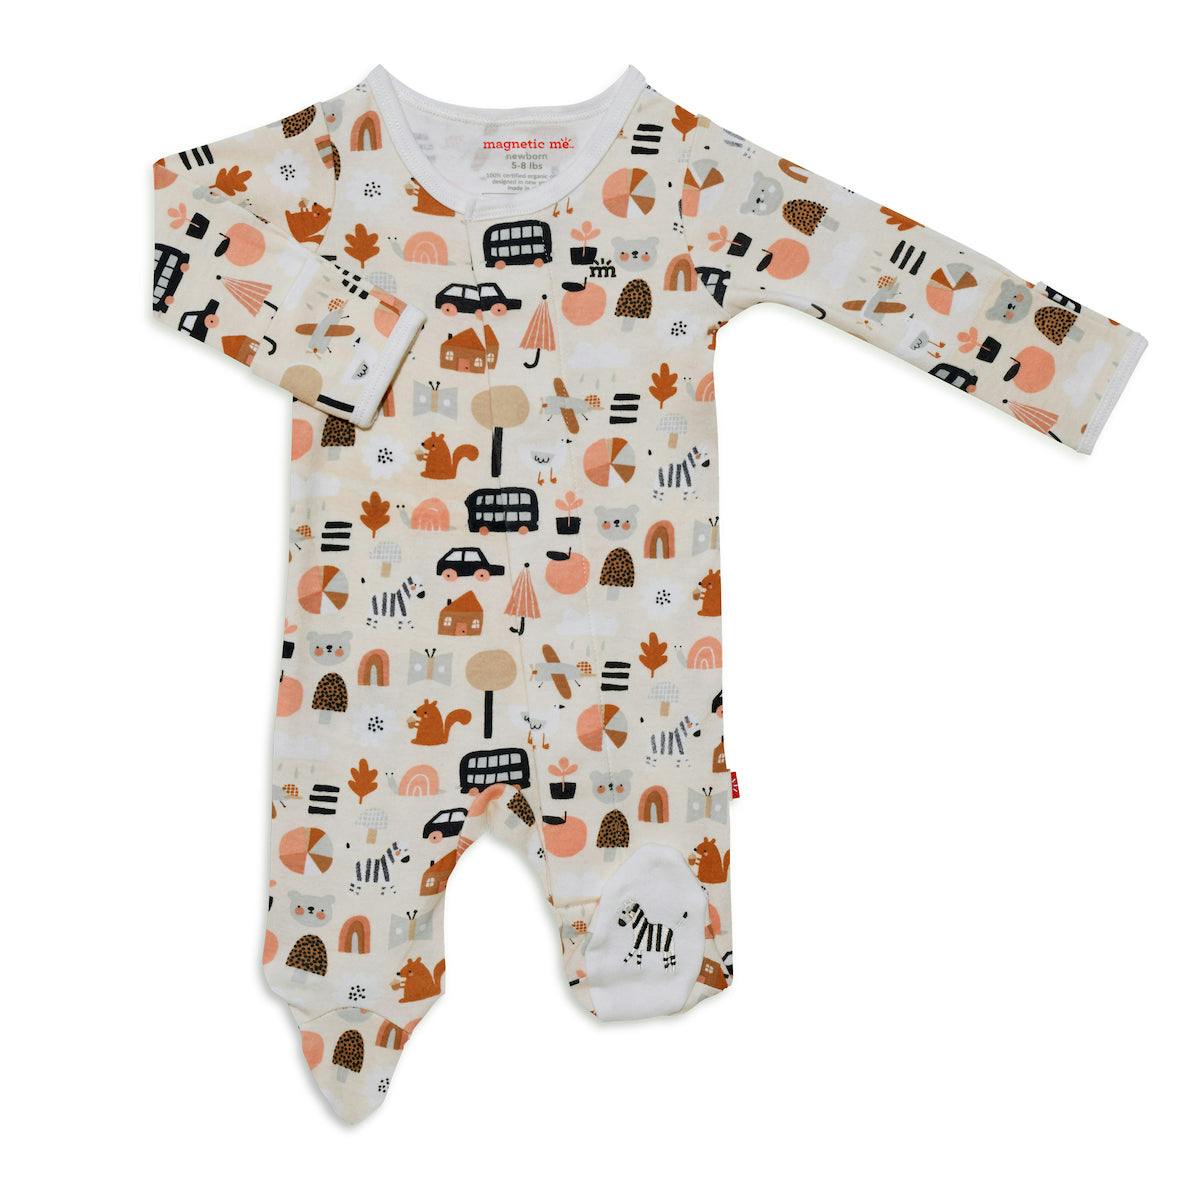 Magnetic Me Organic Cotton Footie Variety Society · 9/12 months